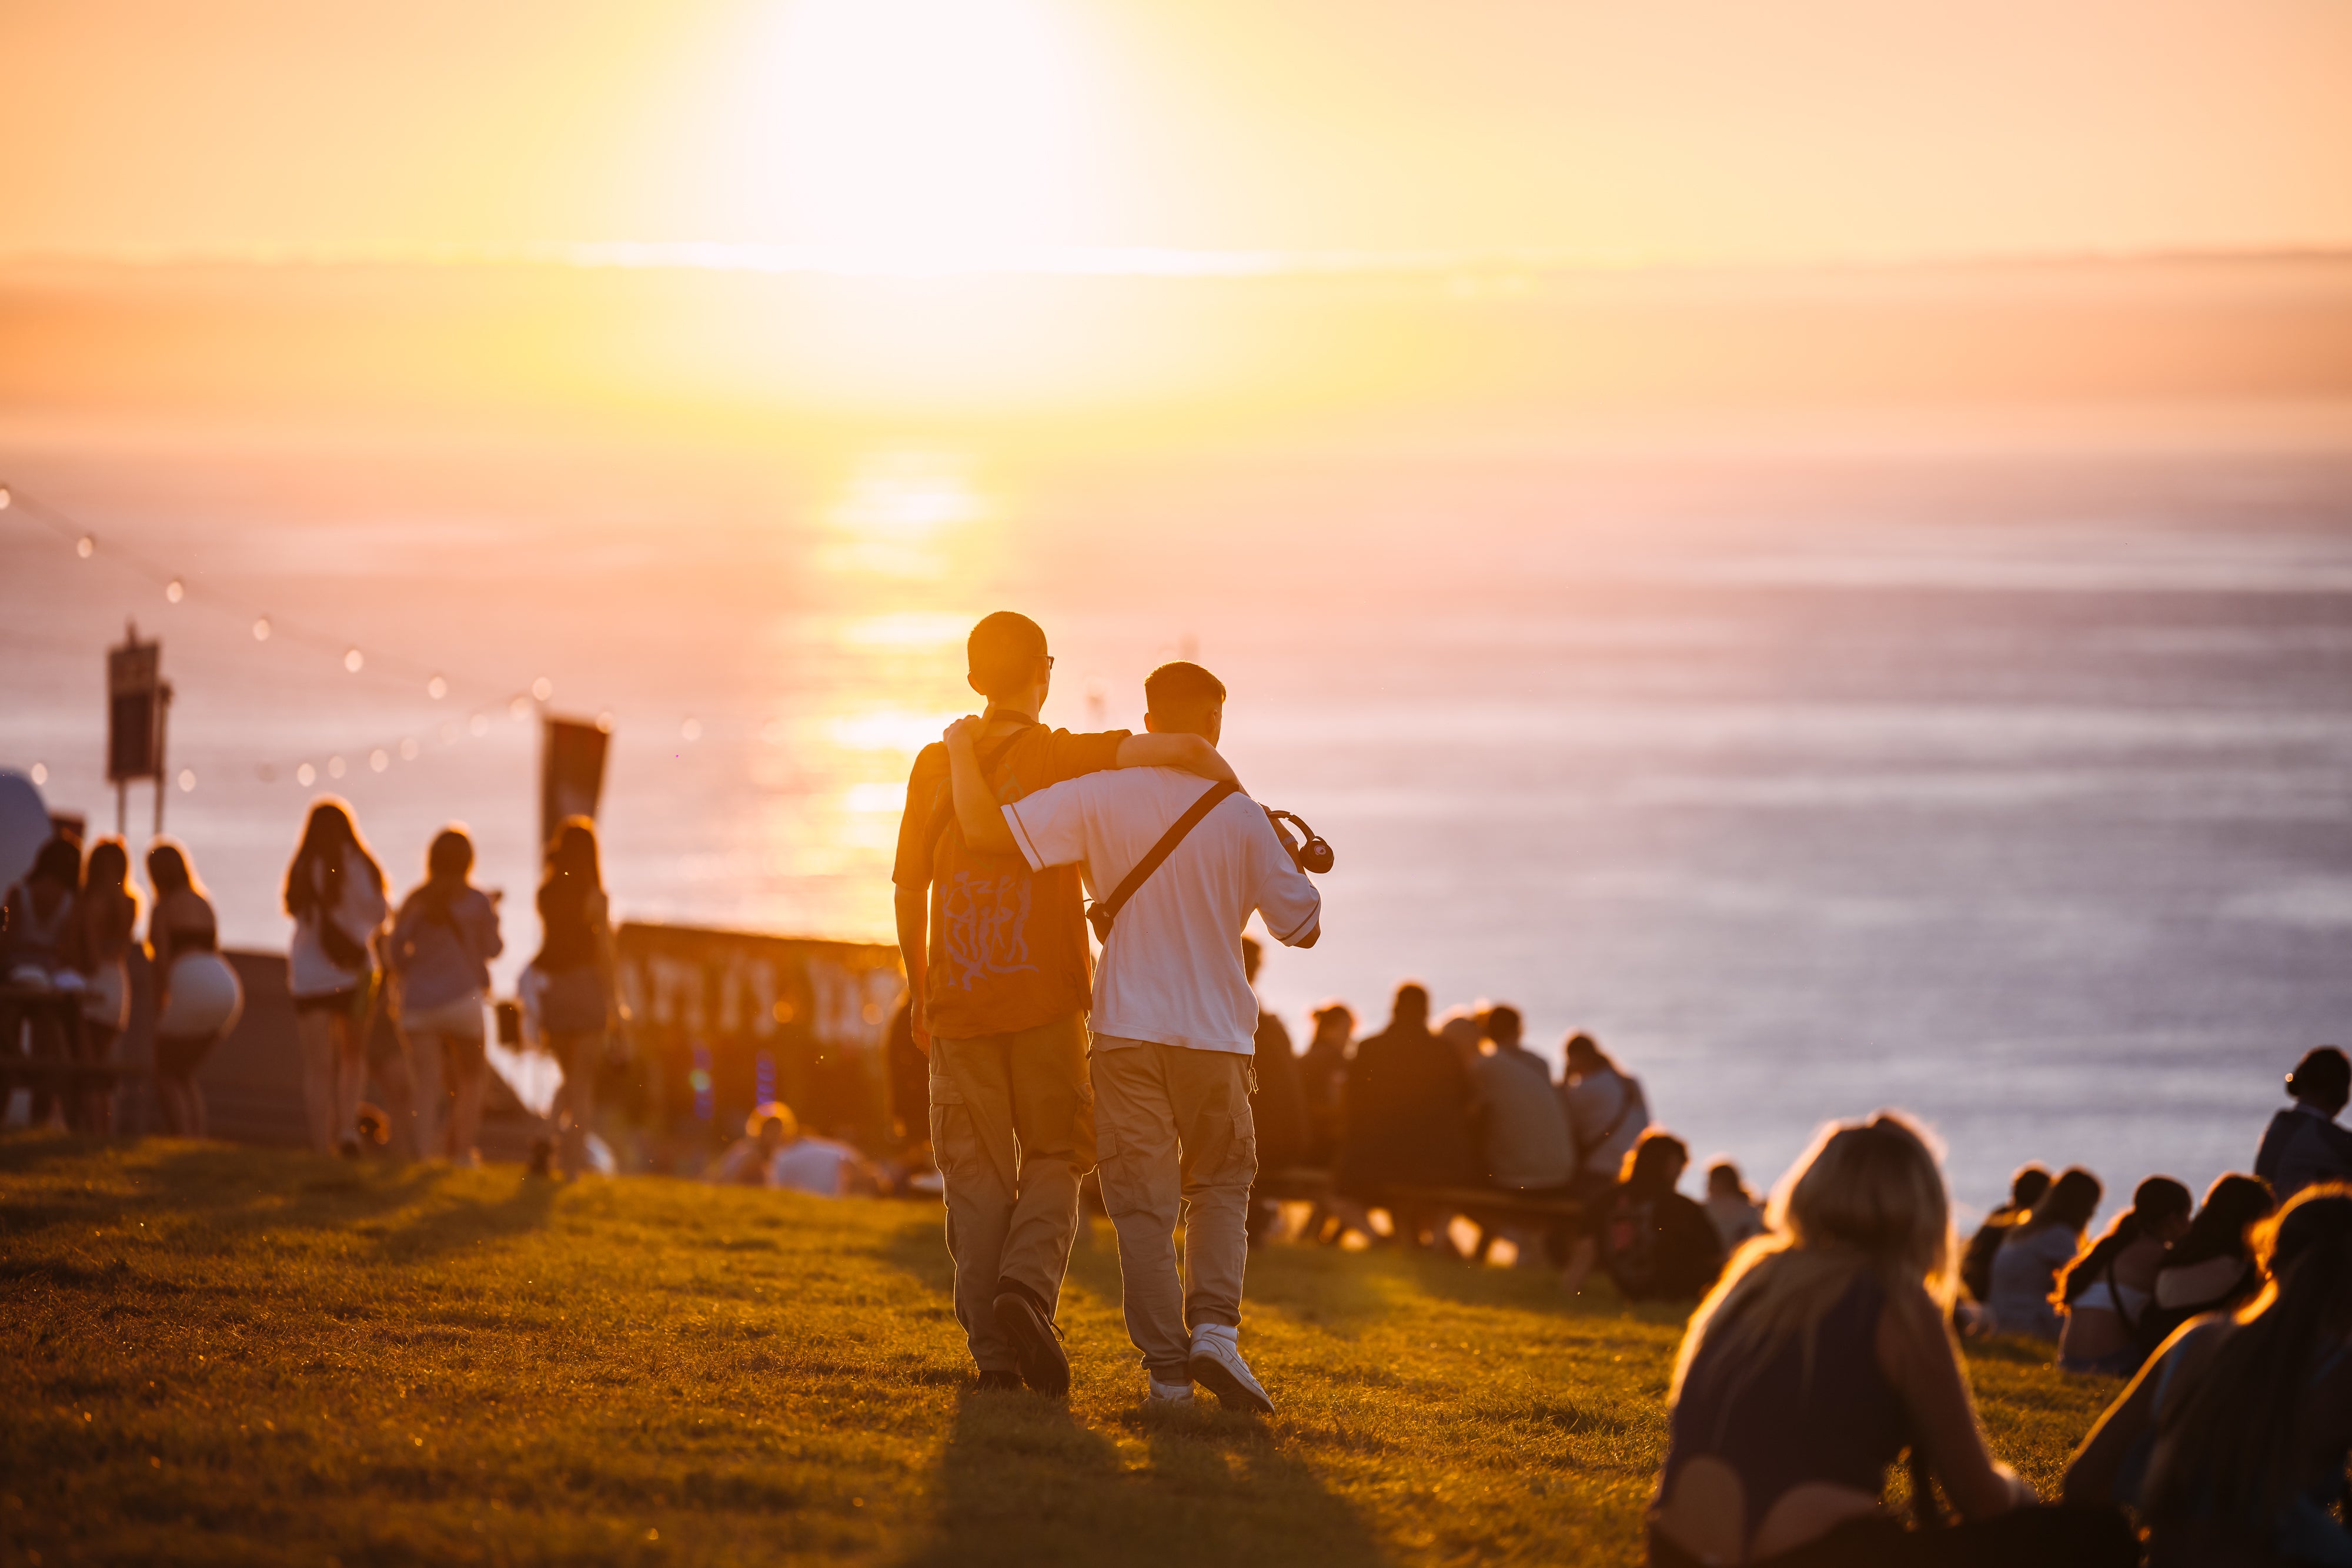 Music fans enjoy the sunset at Boardmasters in Cornwall